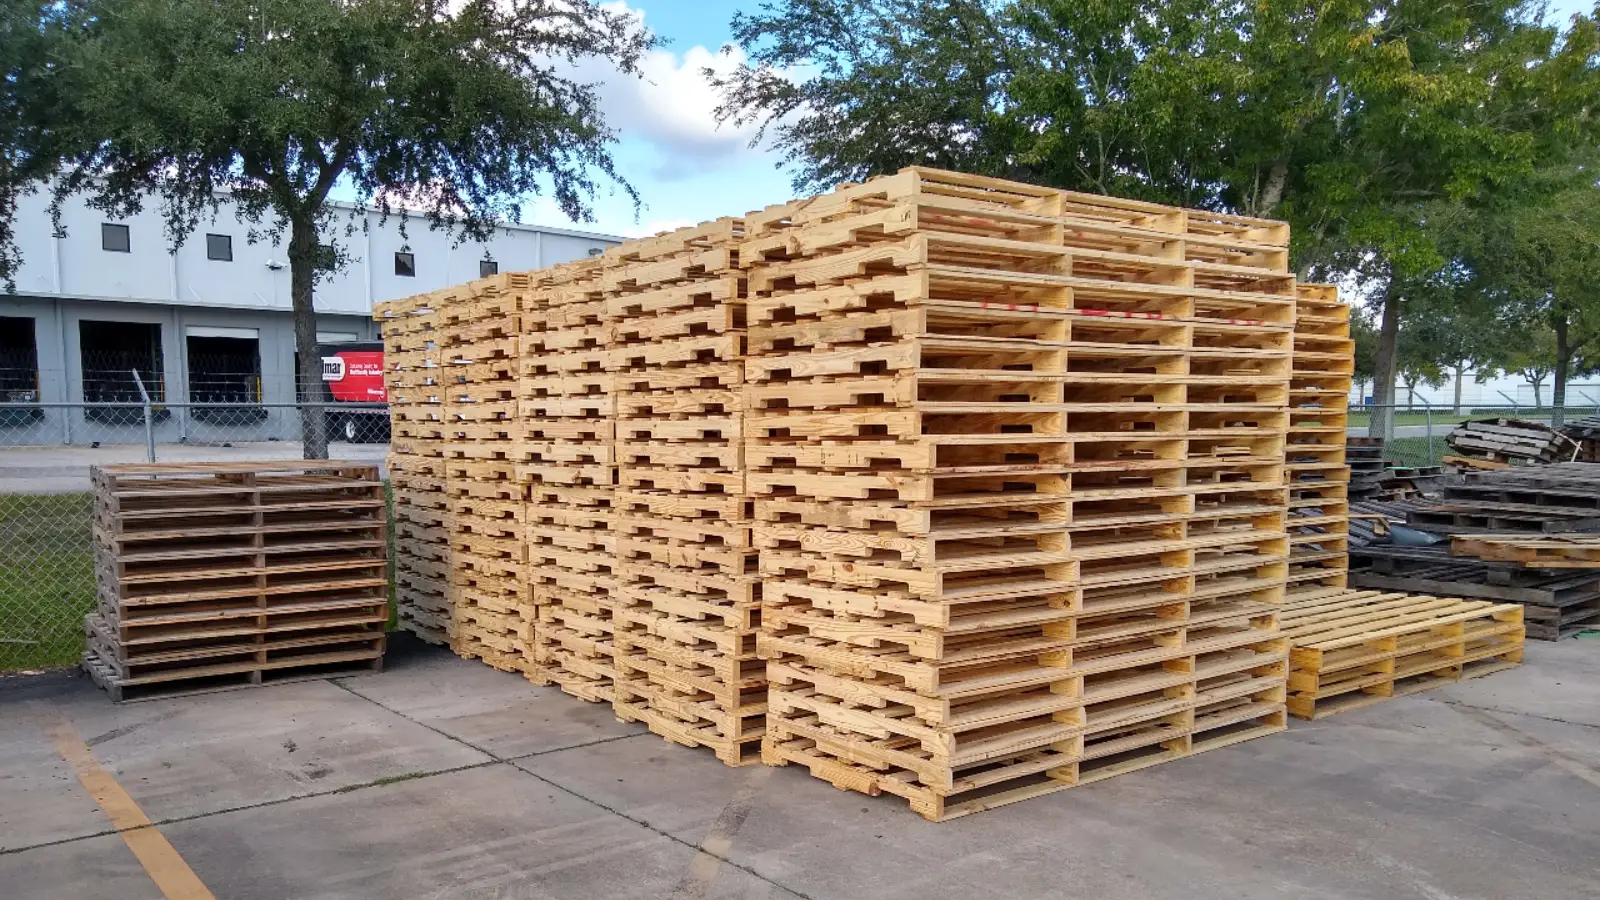 Buy New, Used and Custom Pallets